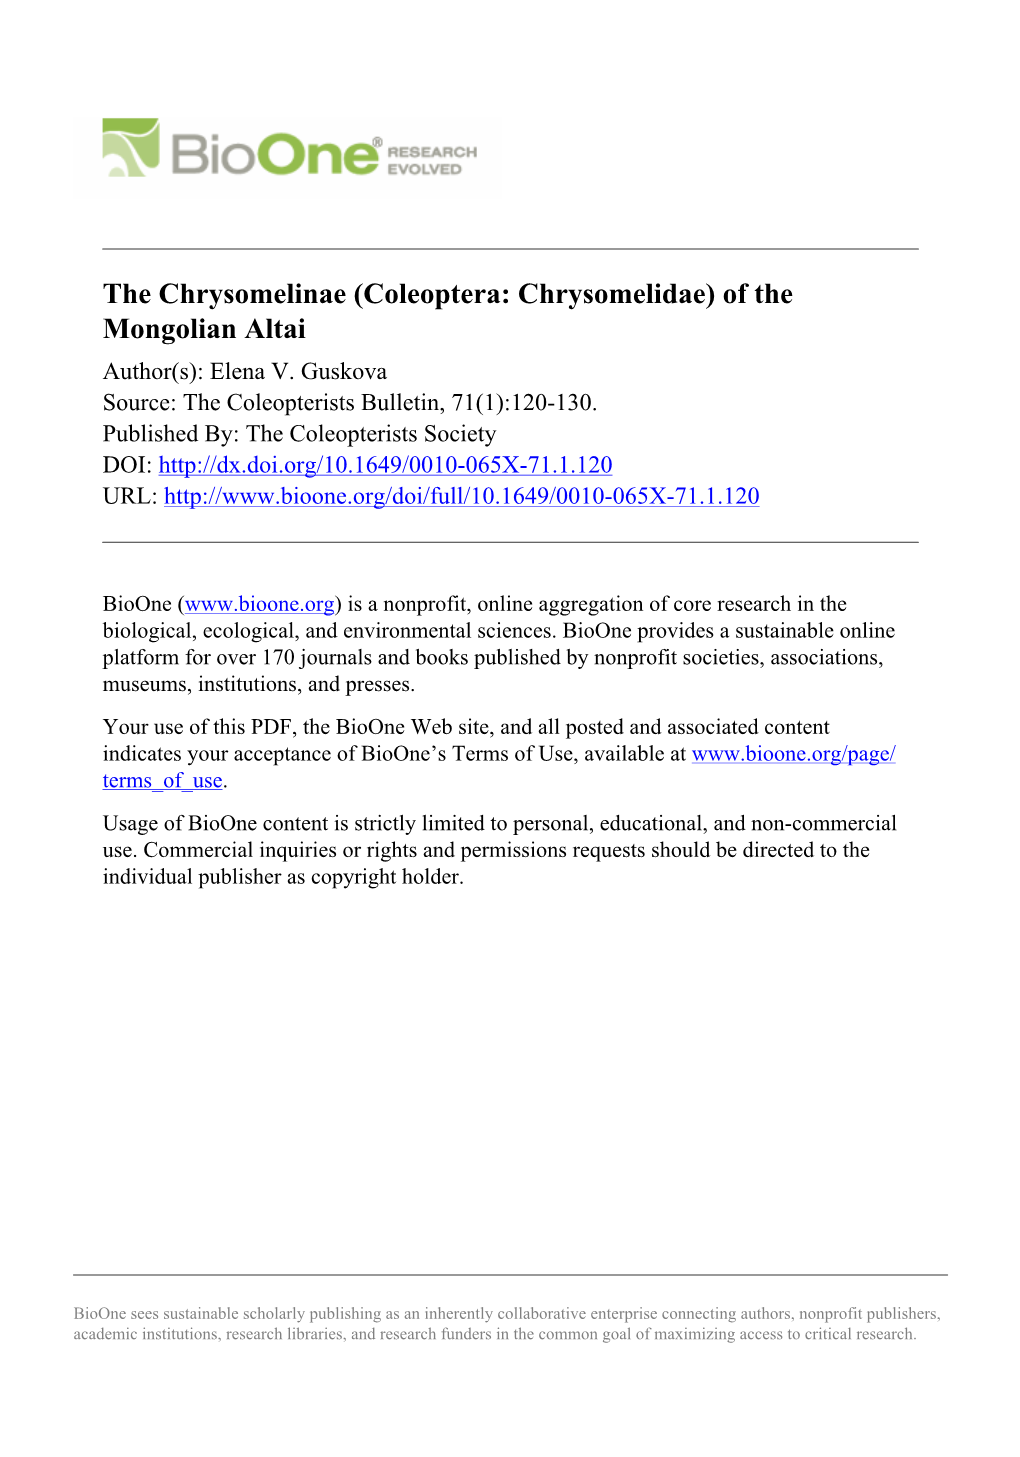 The Chrysomelinae (Coleoptera: Chrysomelidae) of the Mongolian Altai Author(S): Elena V